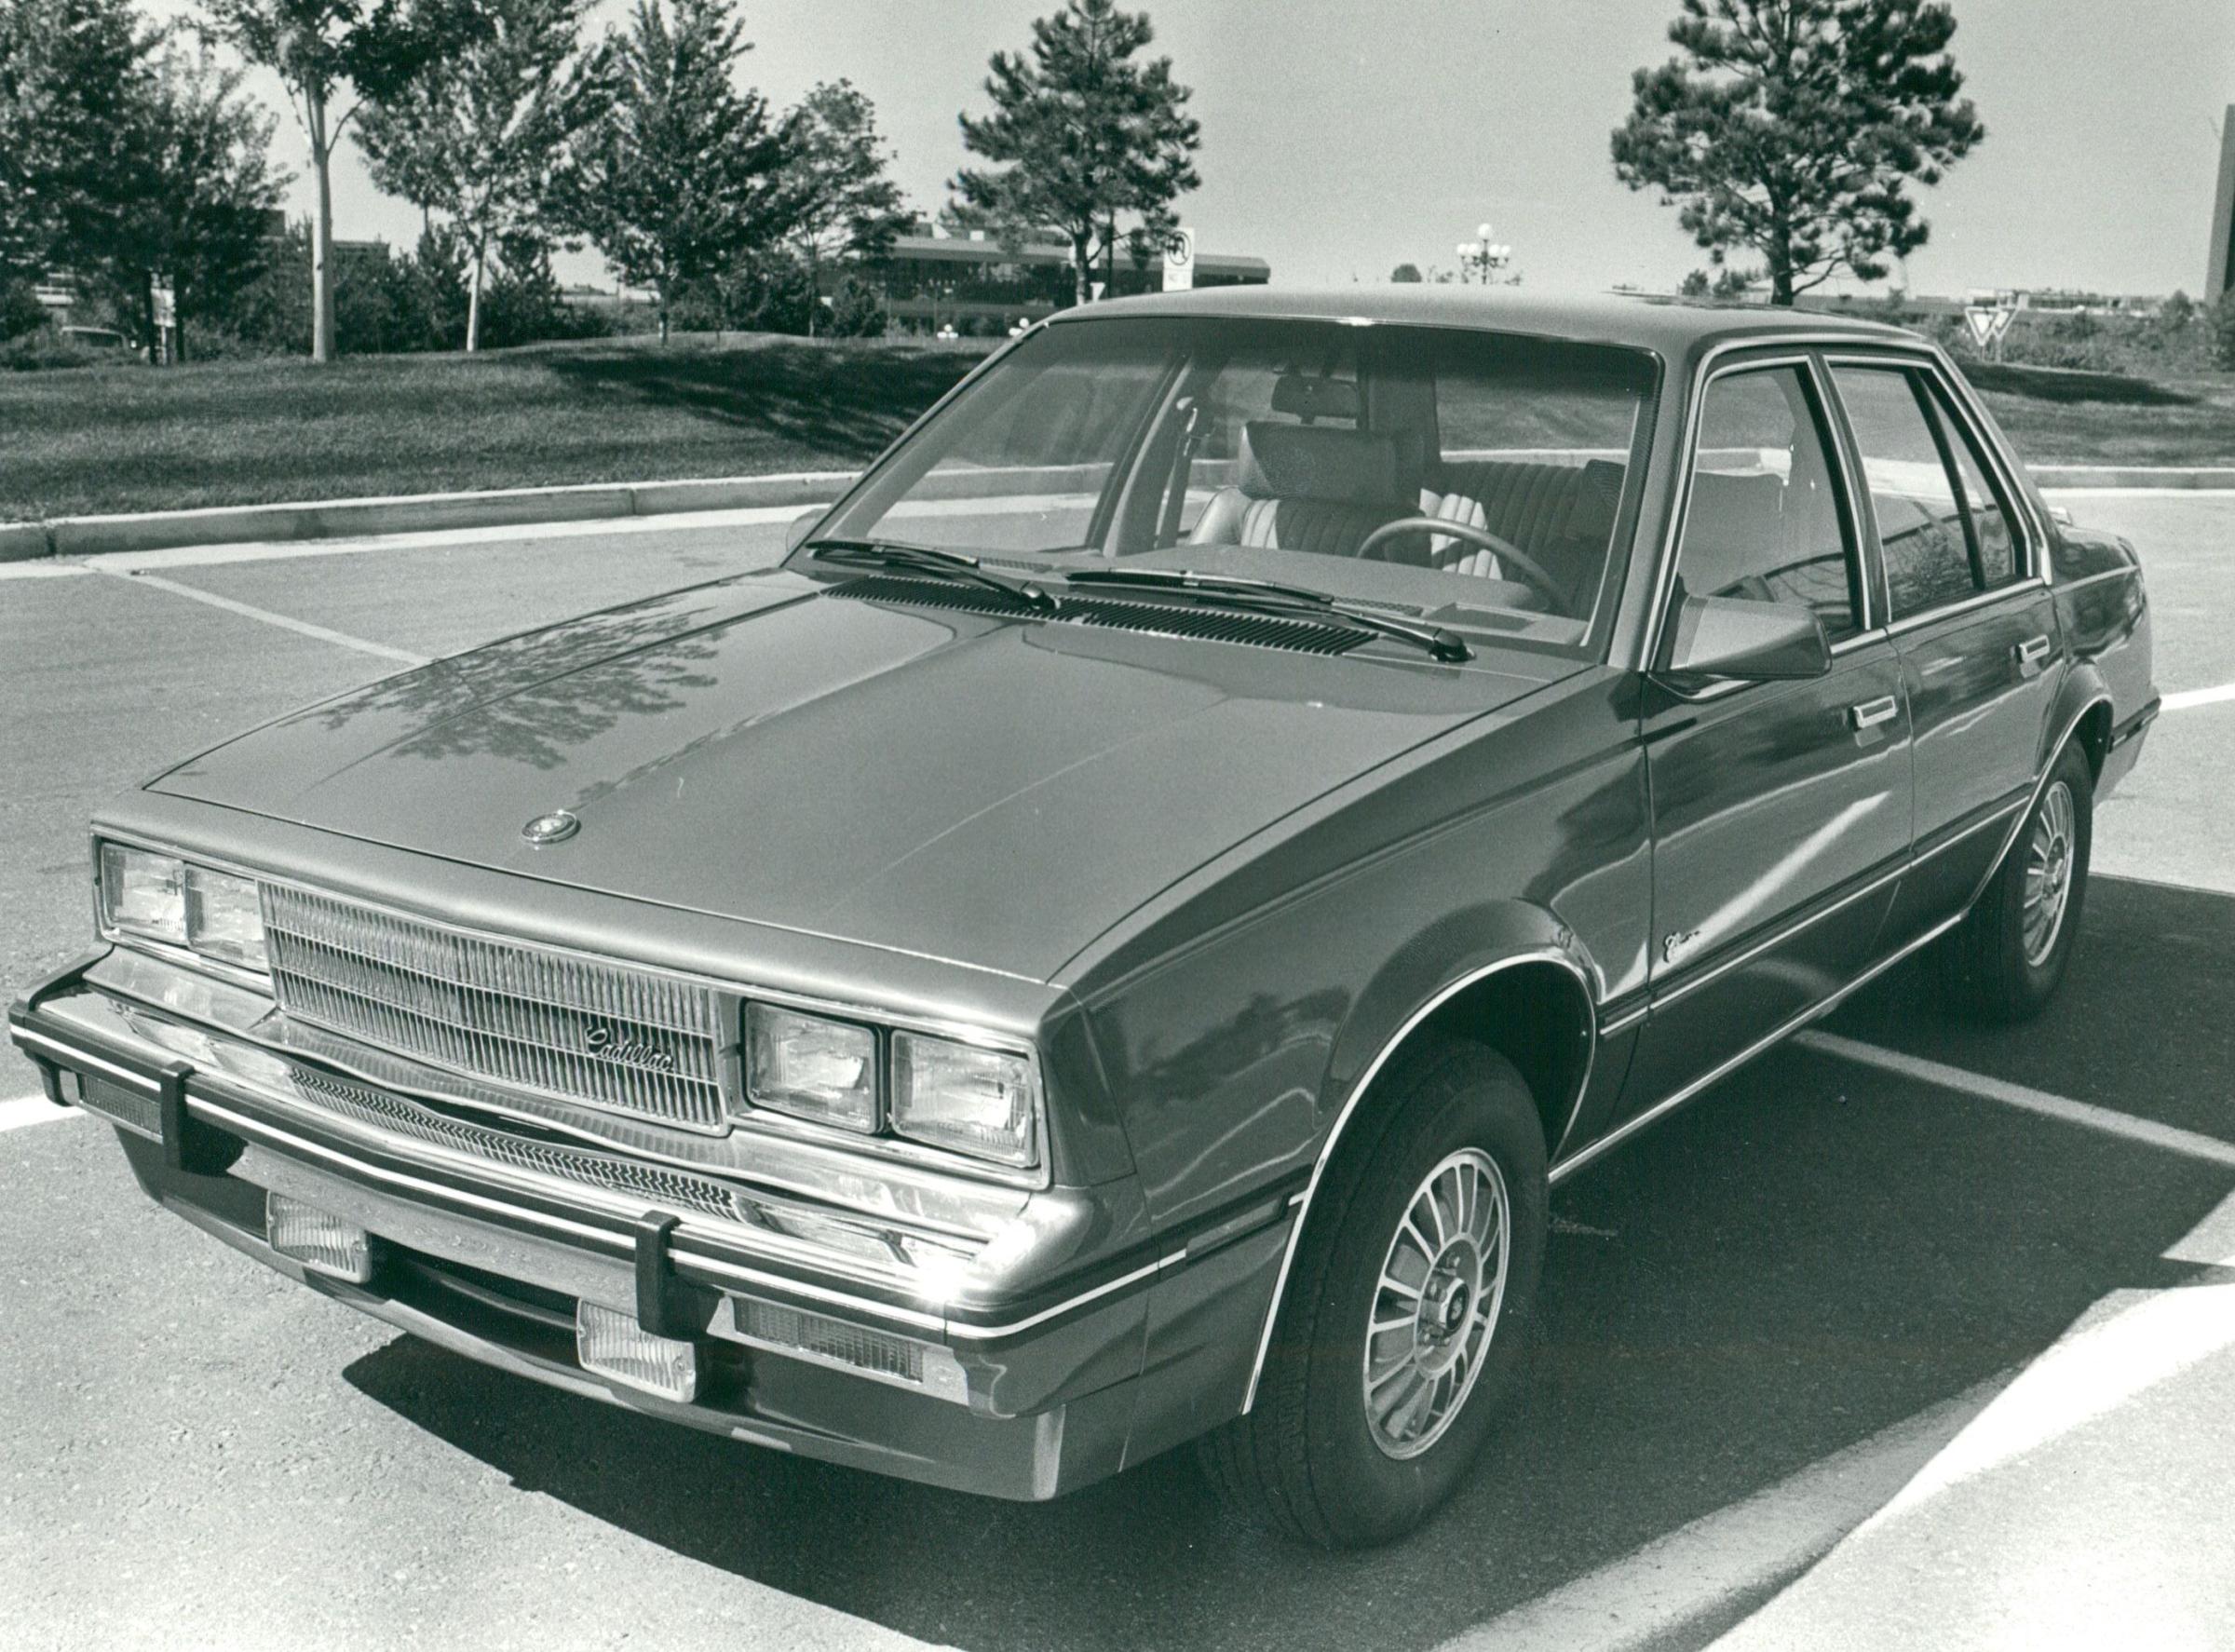 SEP 21 1982, SEP 22 1982; Cadillac Cimarron sports new grille treatment, new fuel-injected 2.0-liter